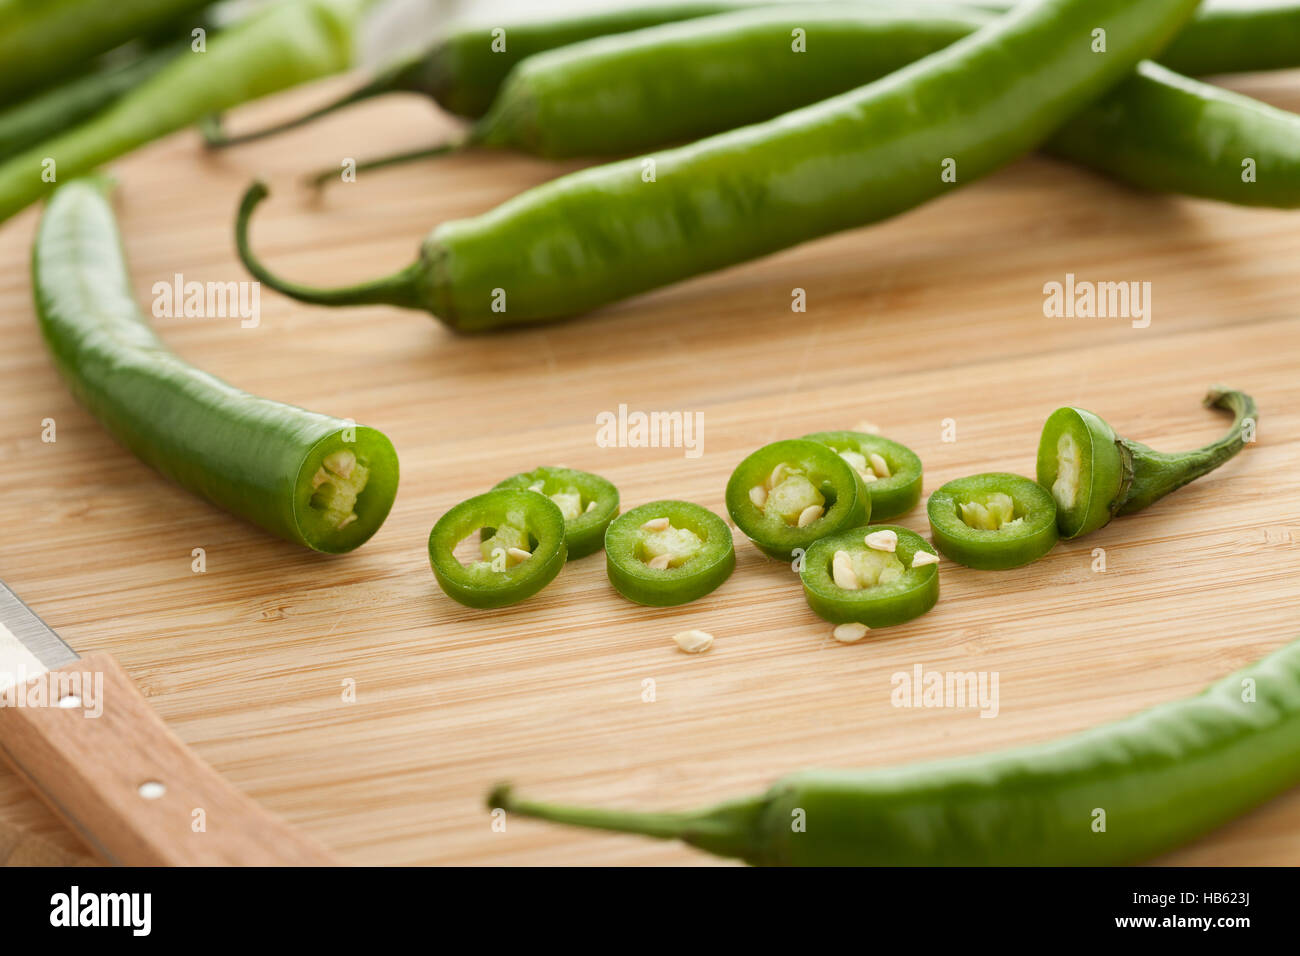 Green hot chili peppers, slices and seeds Stock Photo